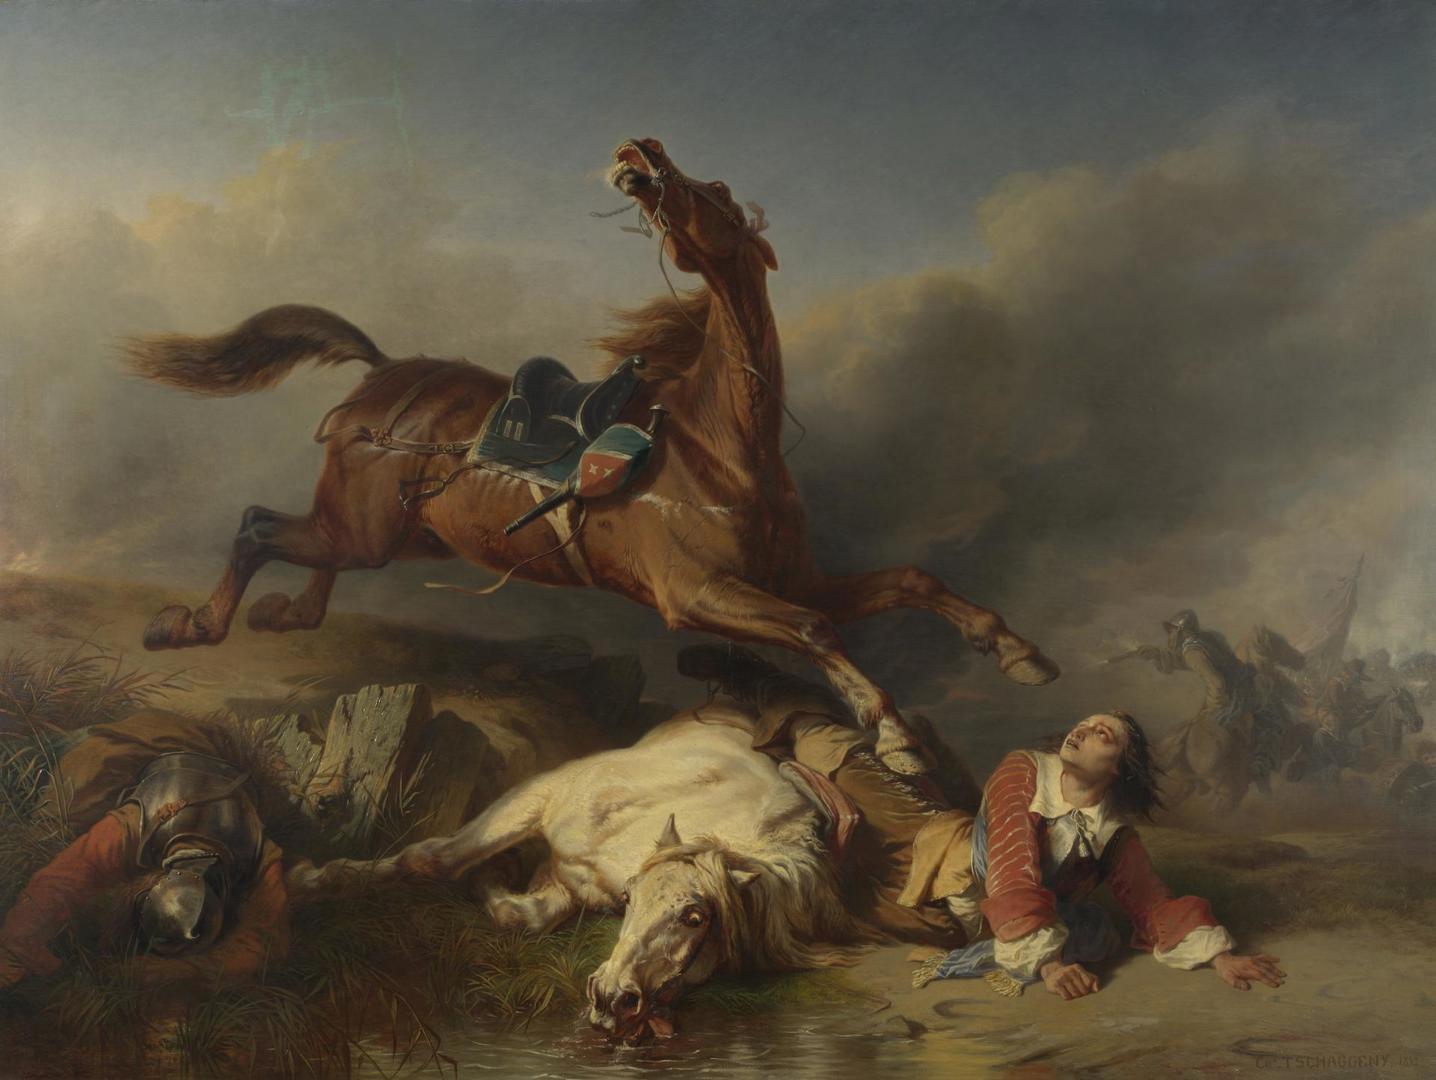 An Episode on the Field of Battle by Charles-Philogène Tschaggeny